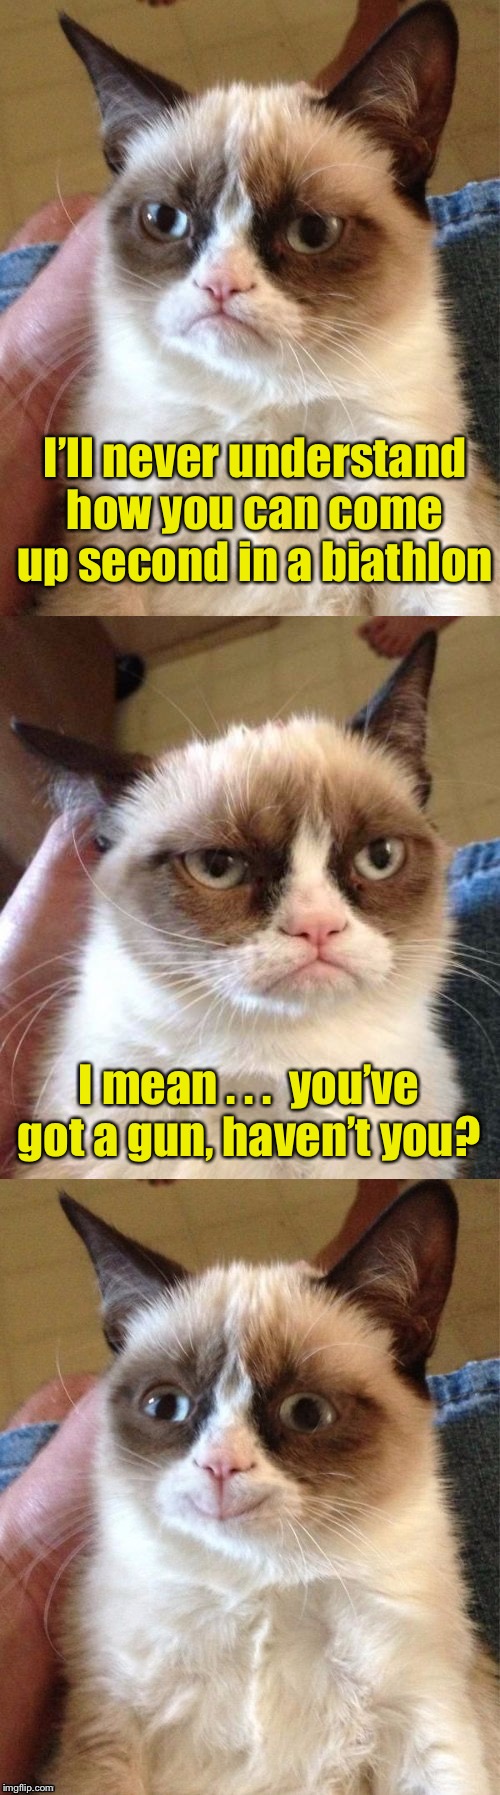 Why Grumpy Cat doesn’t do sports commentary | I’ll never understand how you can come up second in a biathlon; I mean . . .  you’ve got a gun, haven’t you? | image tagged in bad pun grumpy cat,sports,guns | made w/ Imgflip meme maker